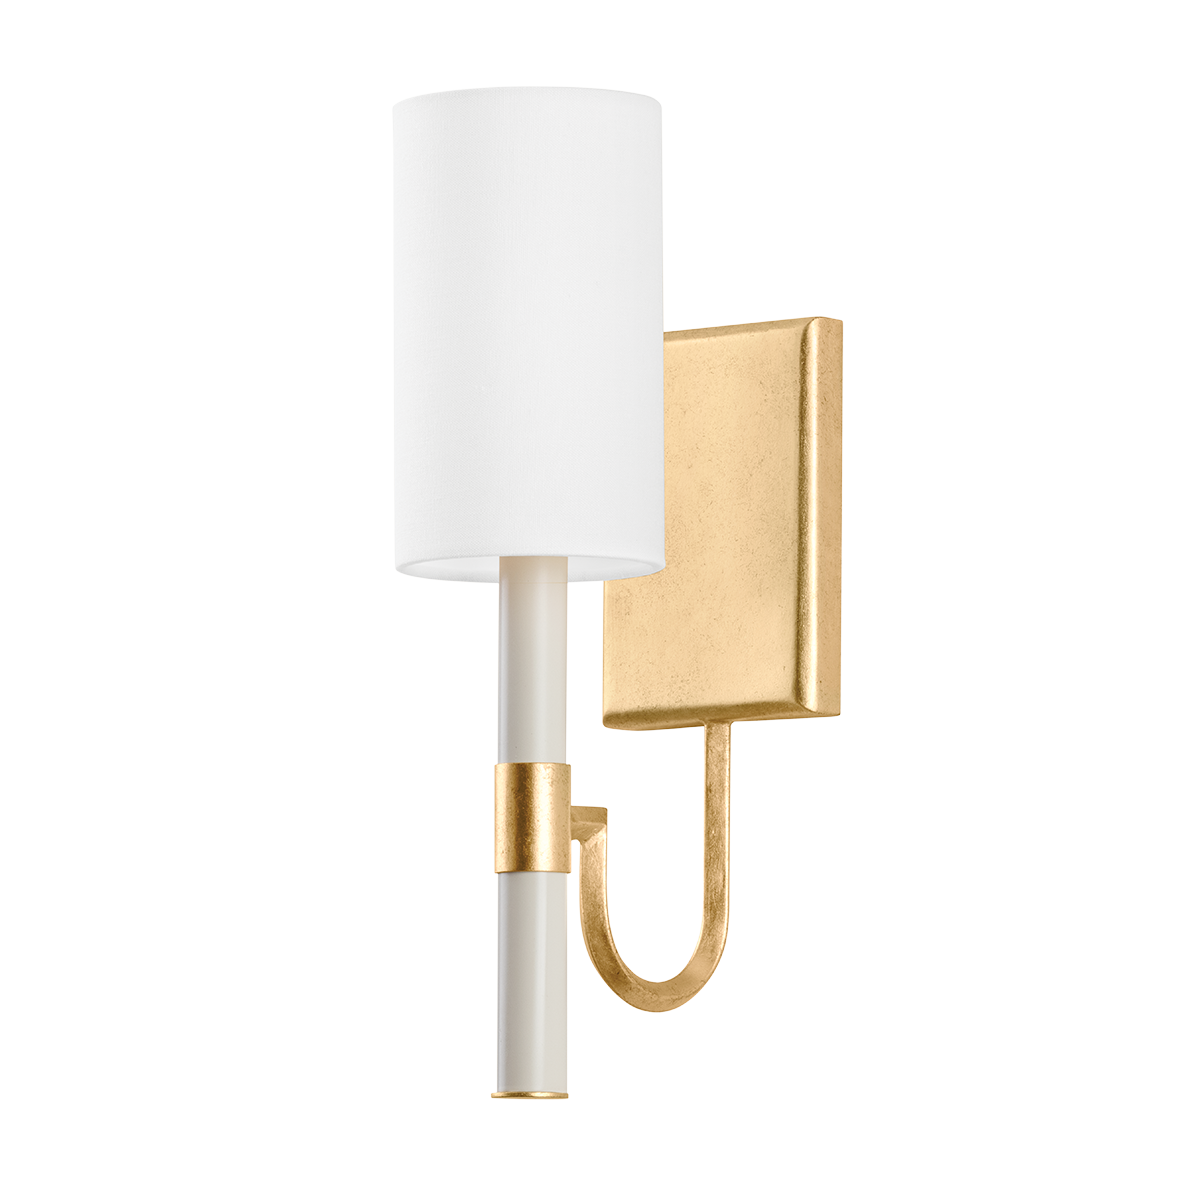 Troy Lighting GUSTINE Wall Sconce Wall Sconce Troy Lighting Vintage Gold Leaf 4.25x4.25x13.75 